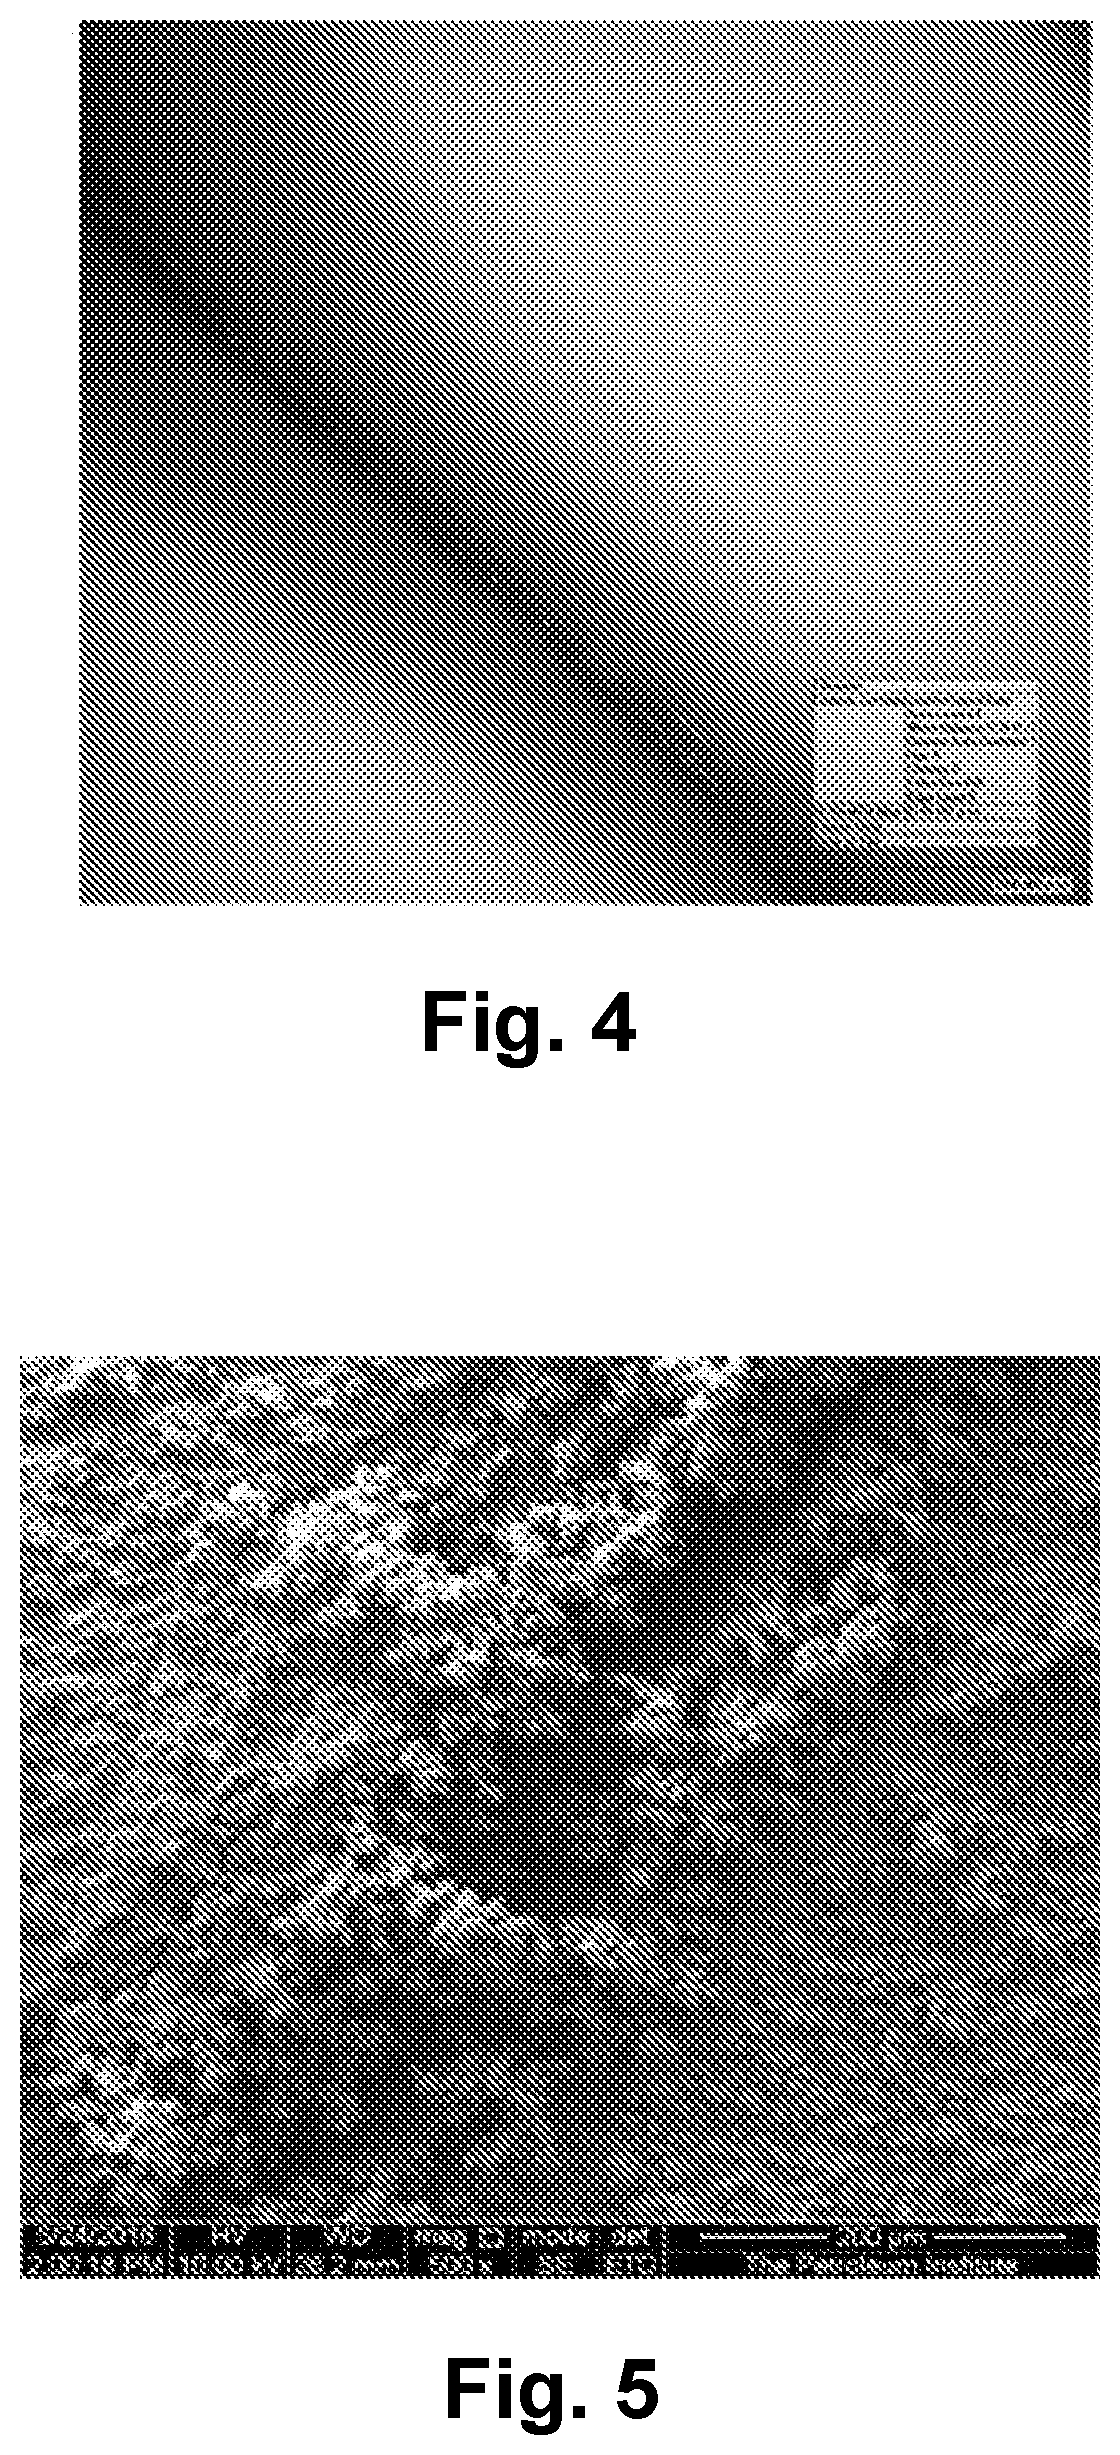 Mesoporous carbon based nanocontainer coatings for corrosion protection of metal structures